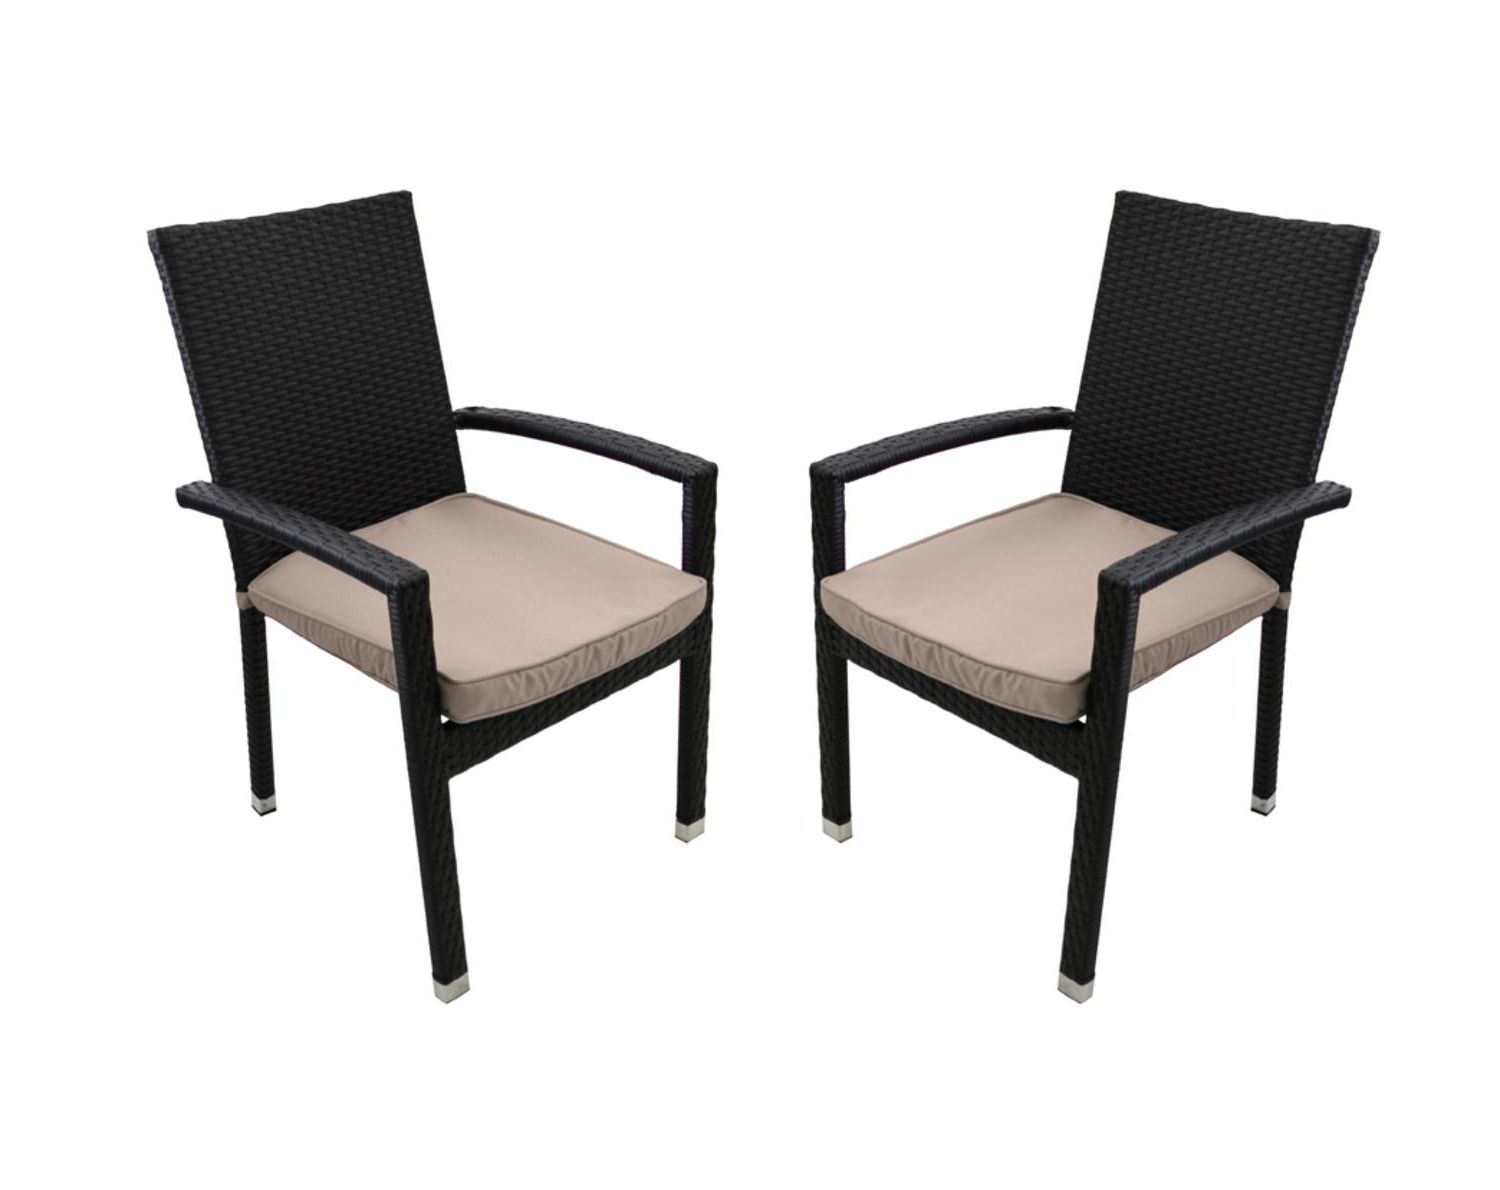 Black Outdoor Dining Chairs Within Famous Set Of 2 Black Resin Wicker Outdoor Patio Furniture Dining Chairs (View 12 of 15)